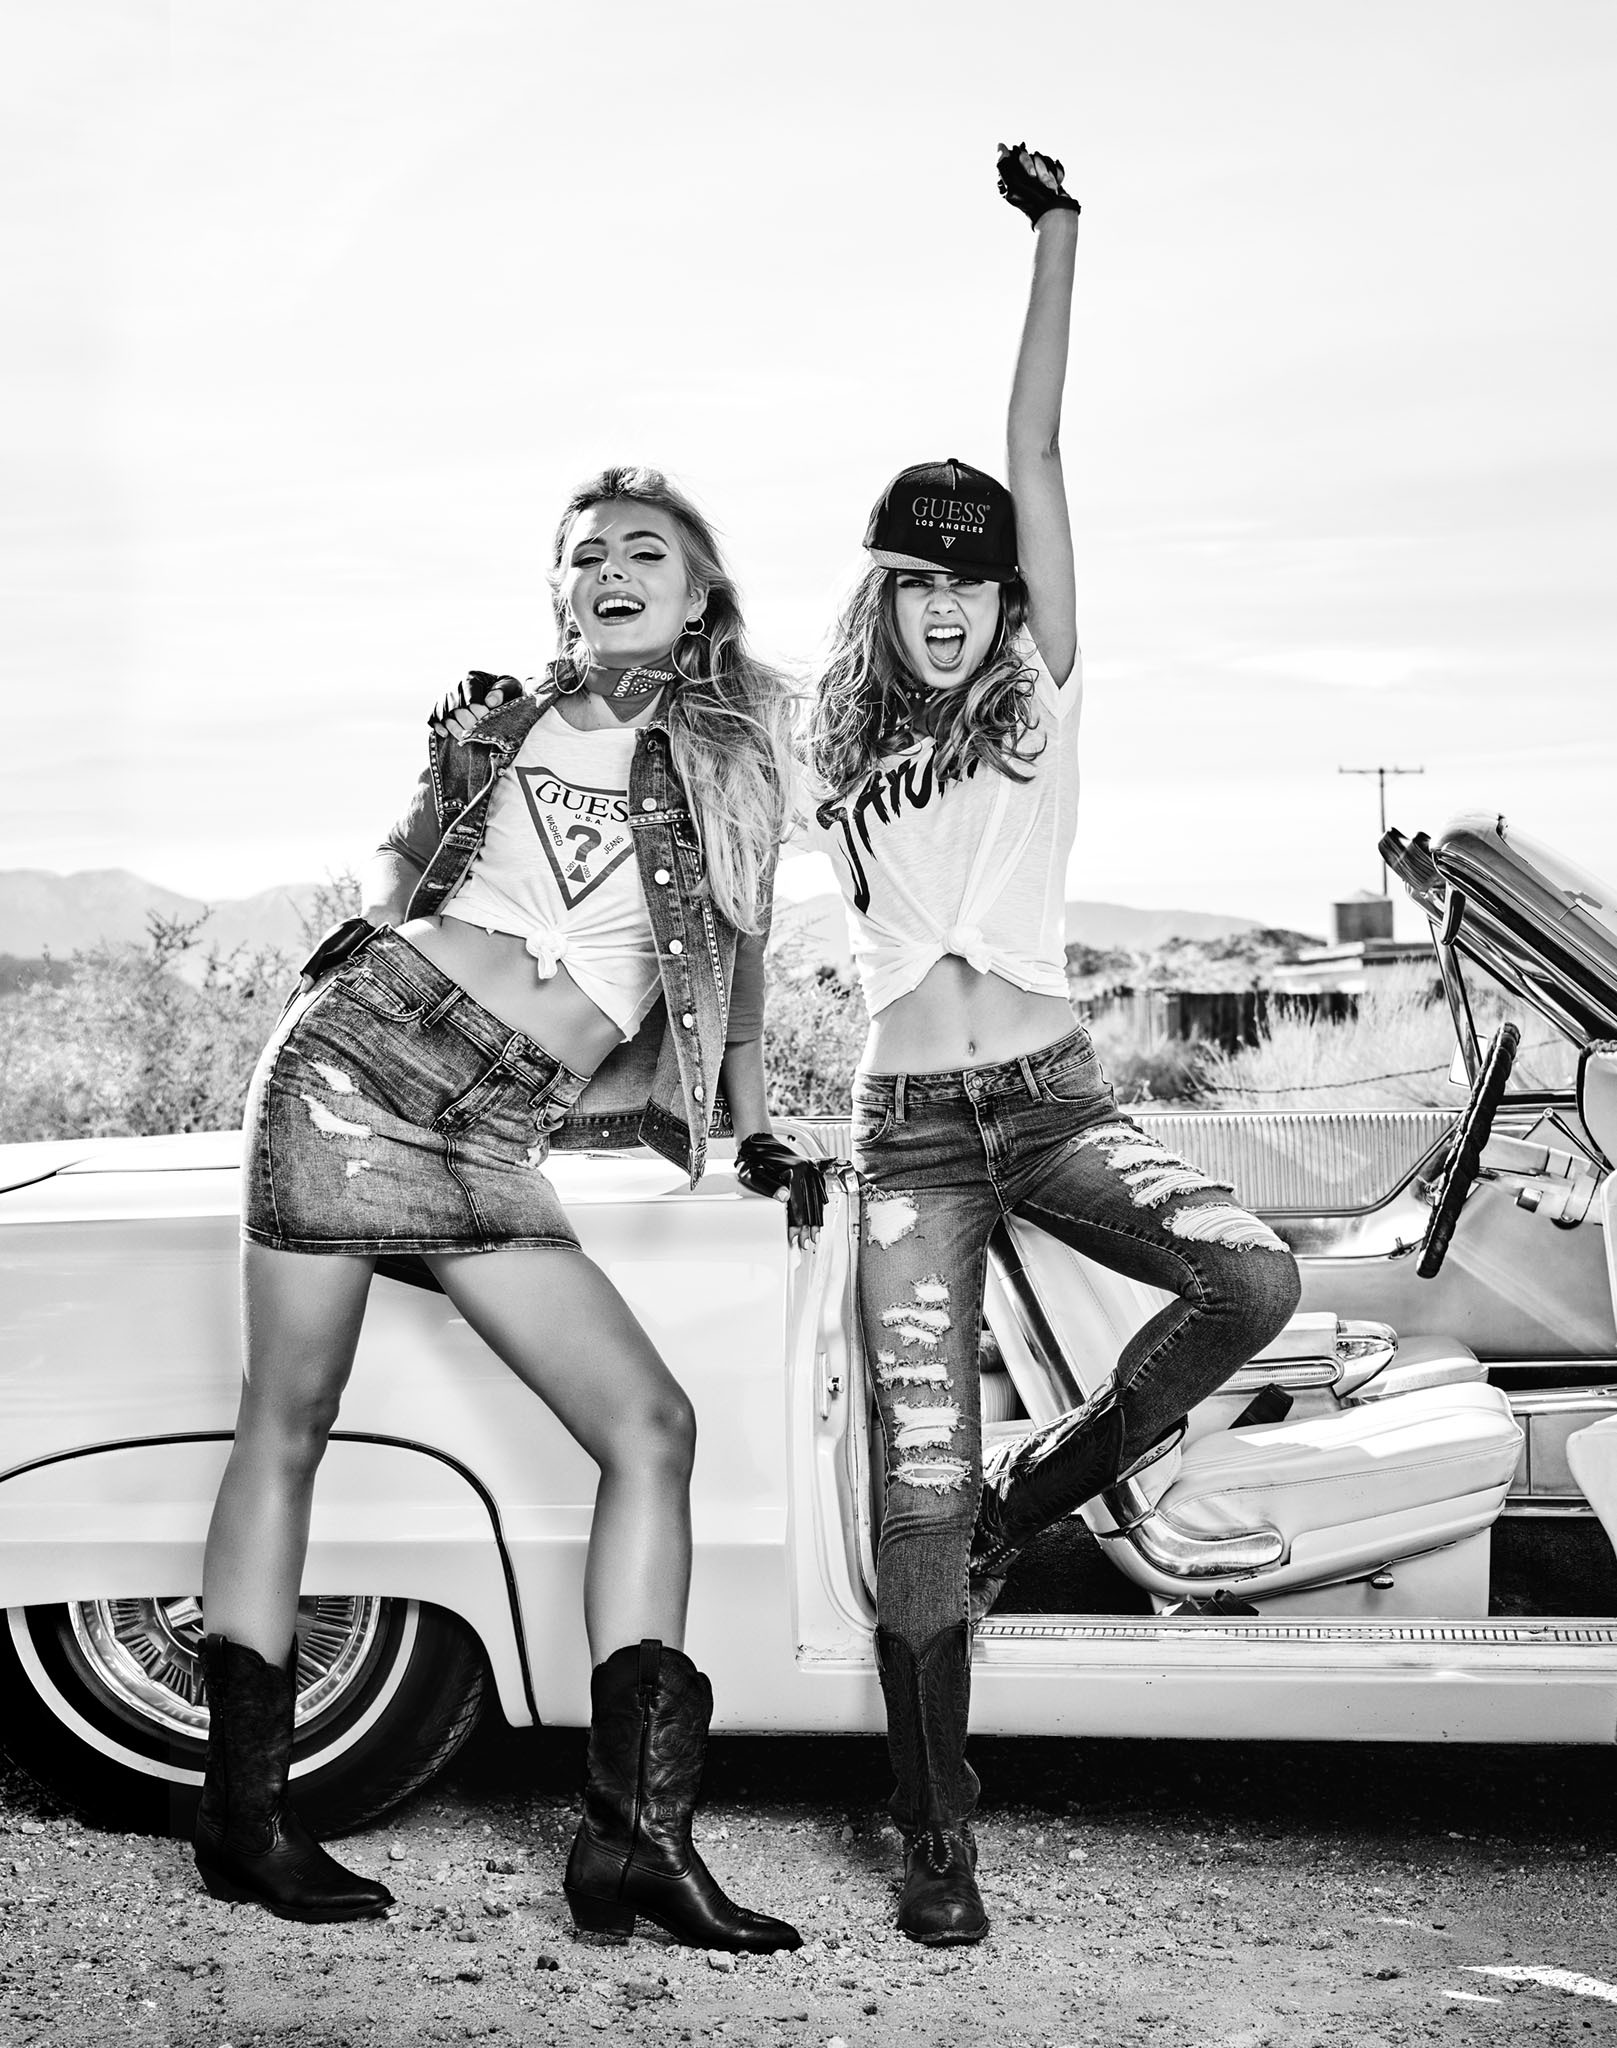 DENIM GUESS JEANS style SHOOT FEB 5th VICTORVILLE, CA